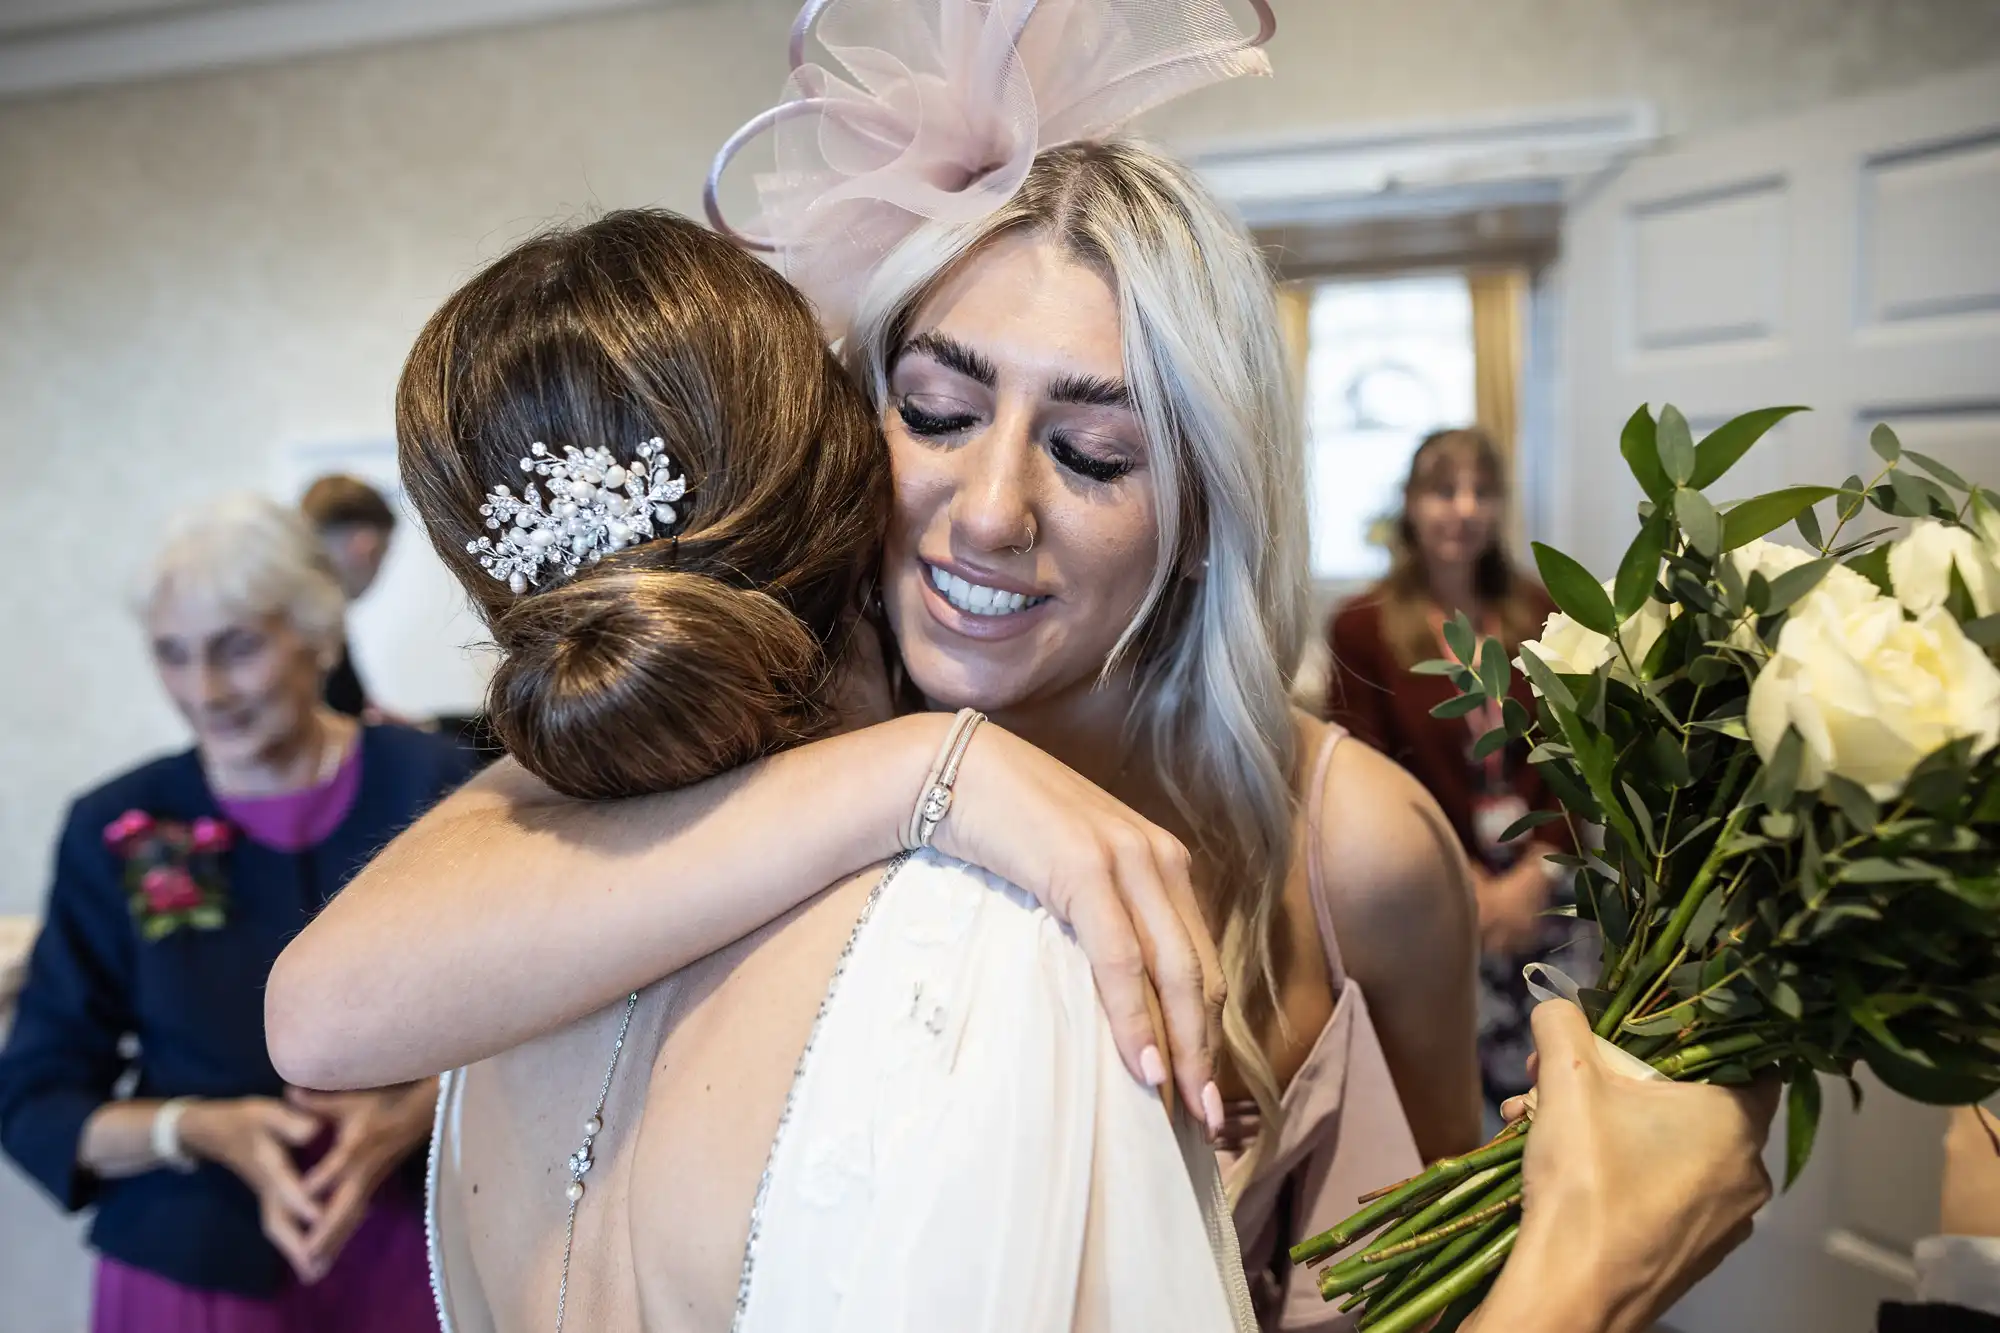 A woman with a floral hairpiece hugs another woman holding a bouquet of white roses in a well-lit room. An elderly woman in the background watches them.